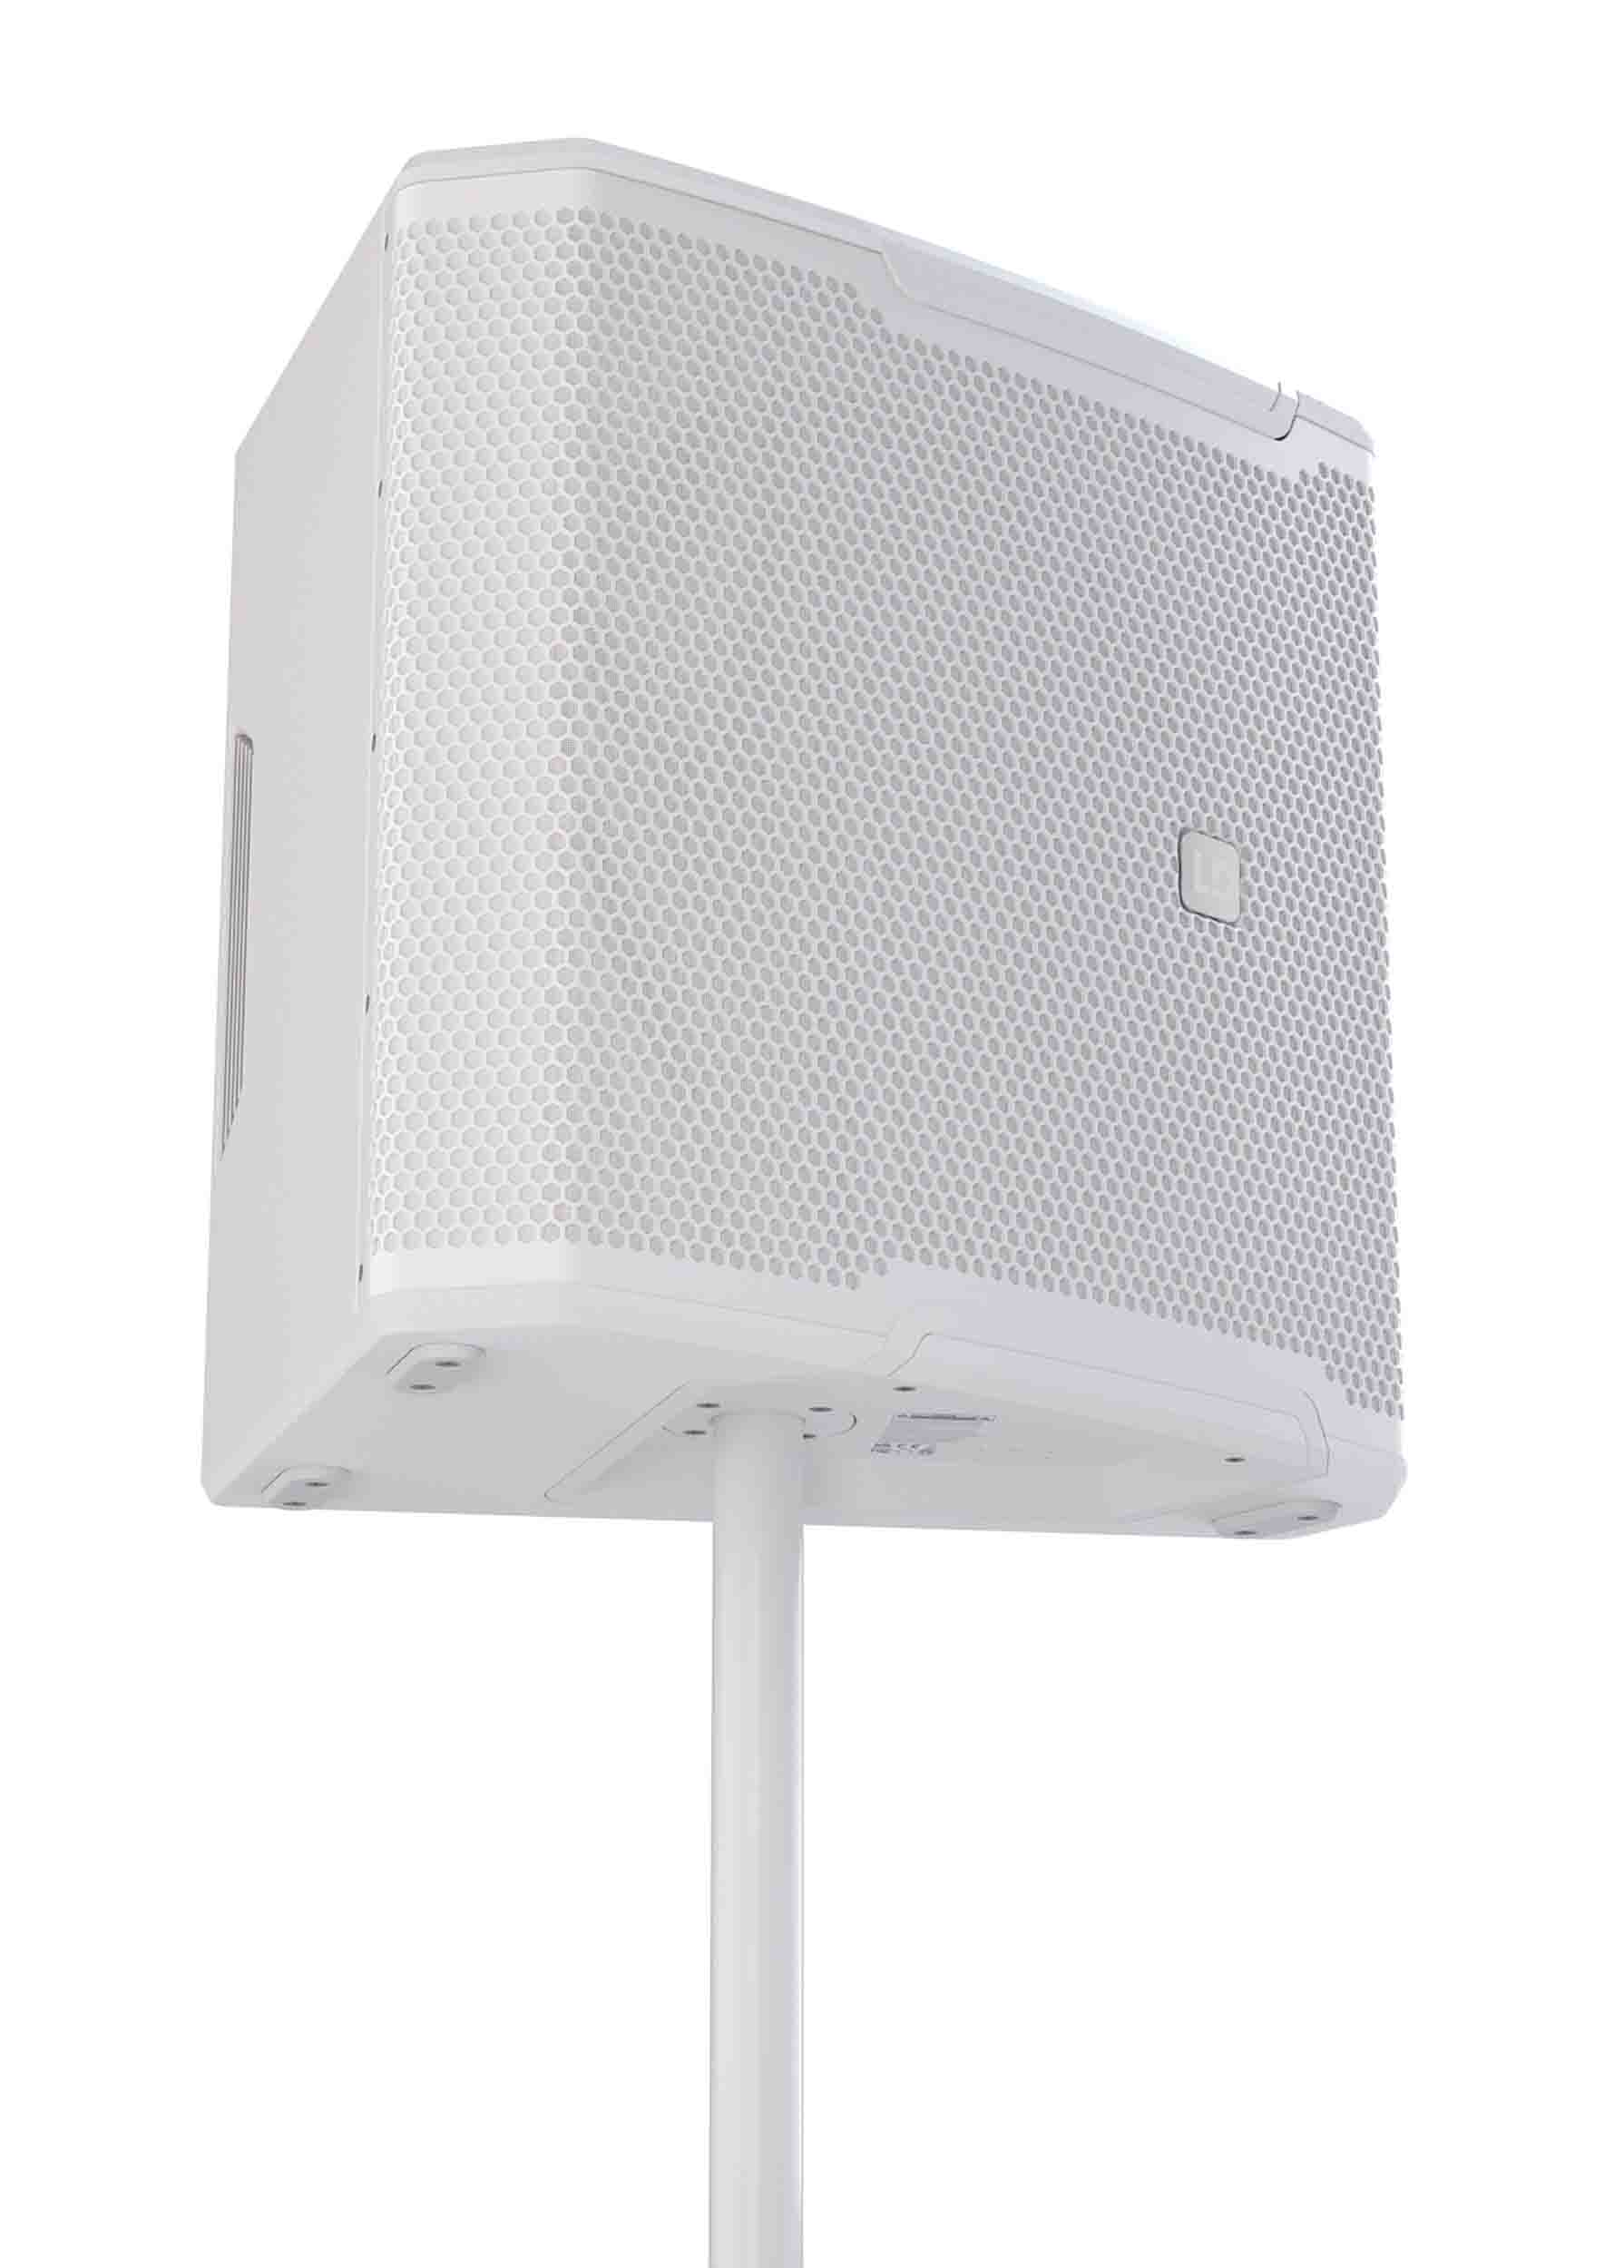 LD System LDS-MON15AG3W, 15" Powered Coaxial Stage Monitor - White by LD Systems